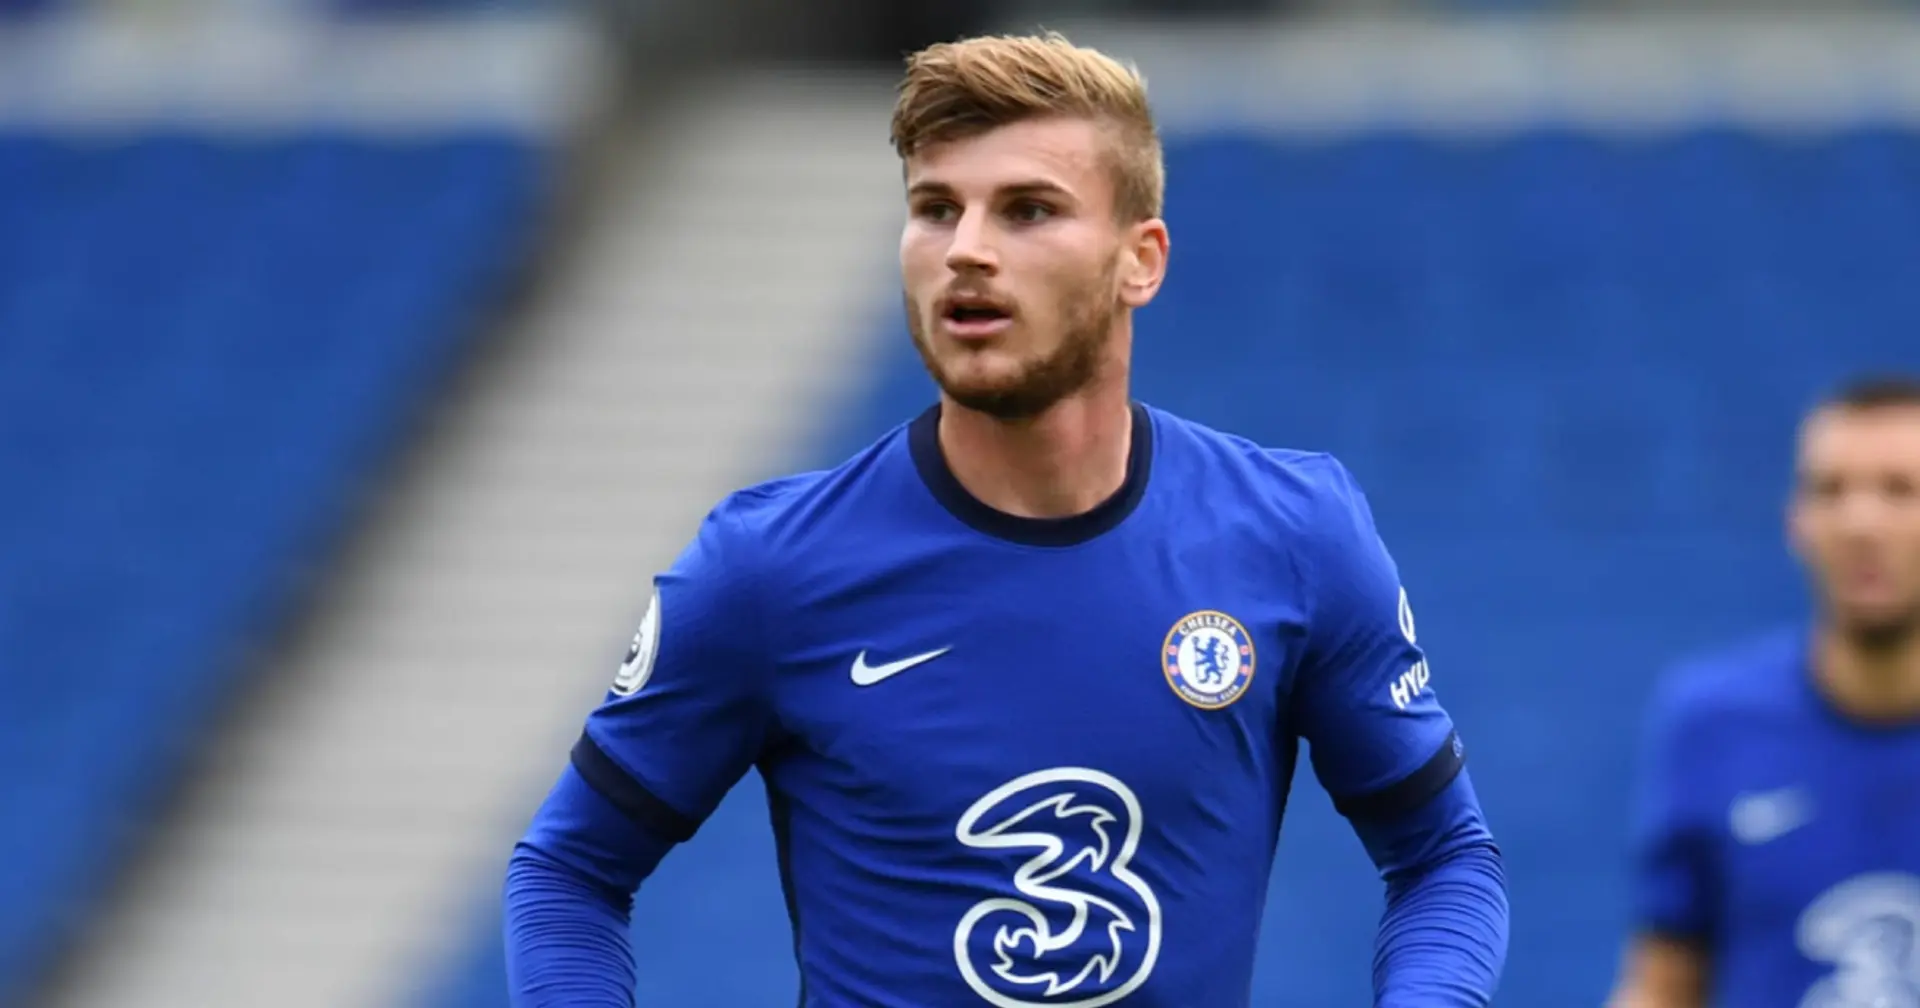 'Very different from someone like Morata': Chelsea fan on why there's no reason to worry about Werner